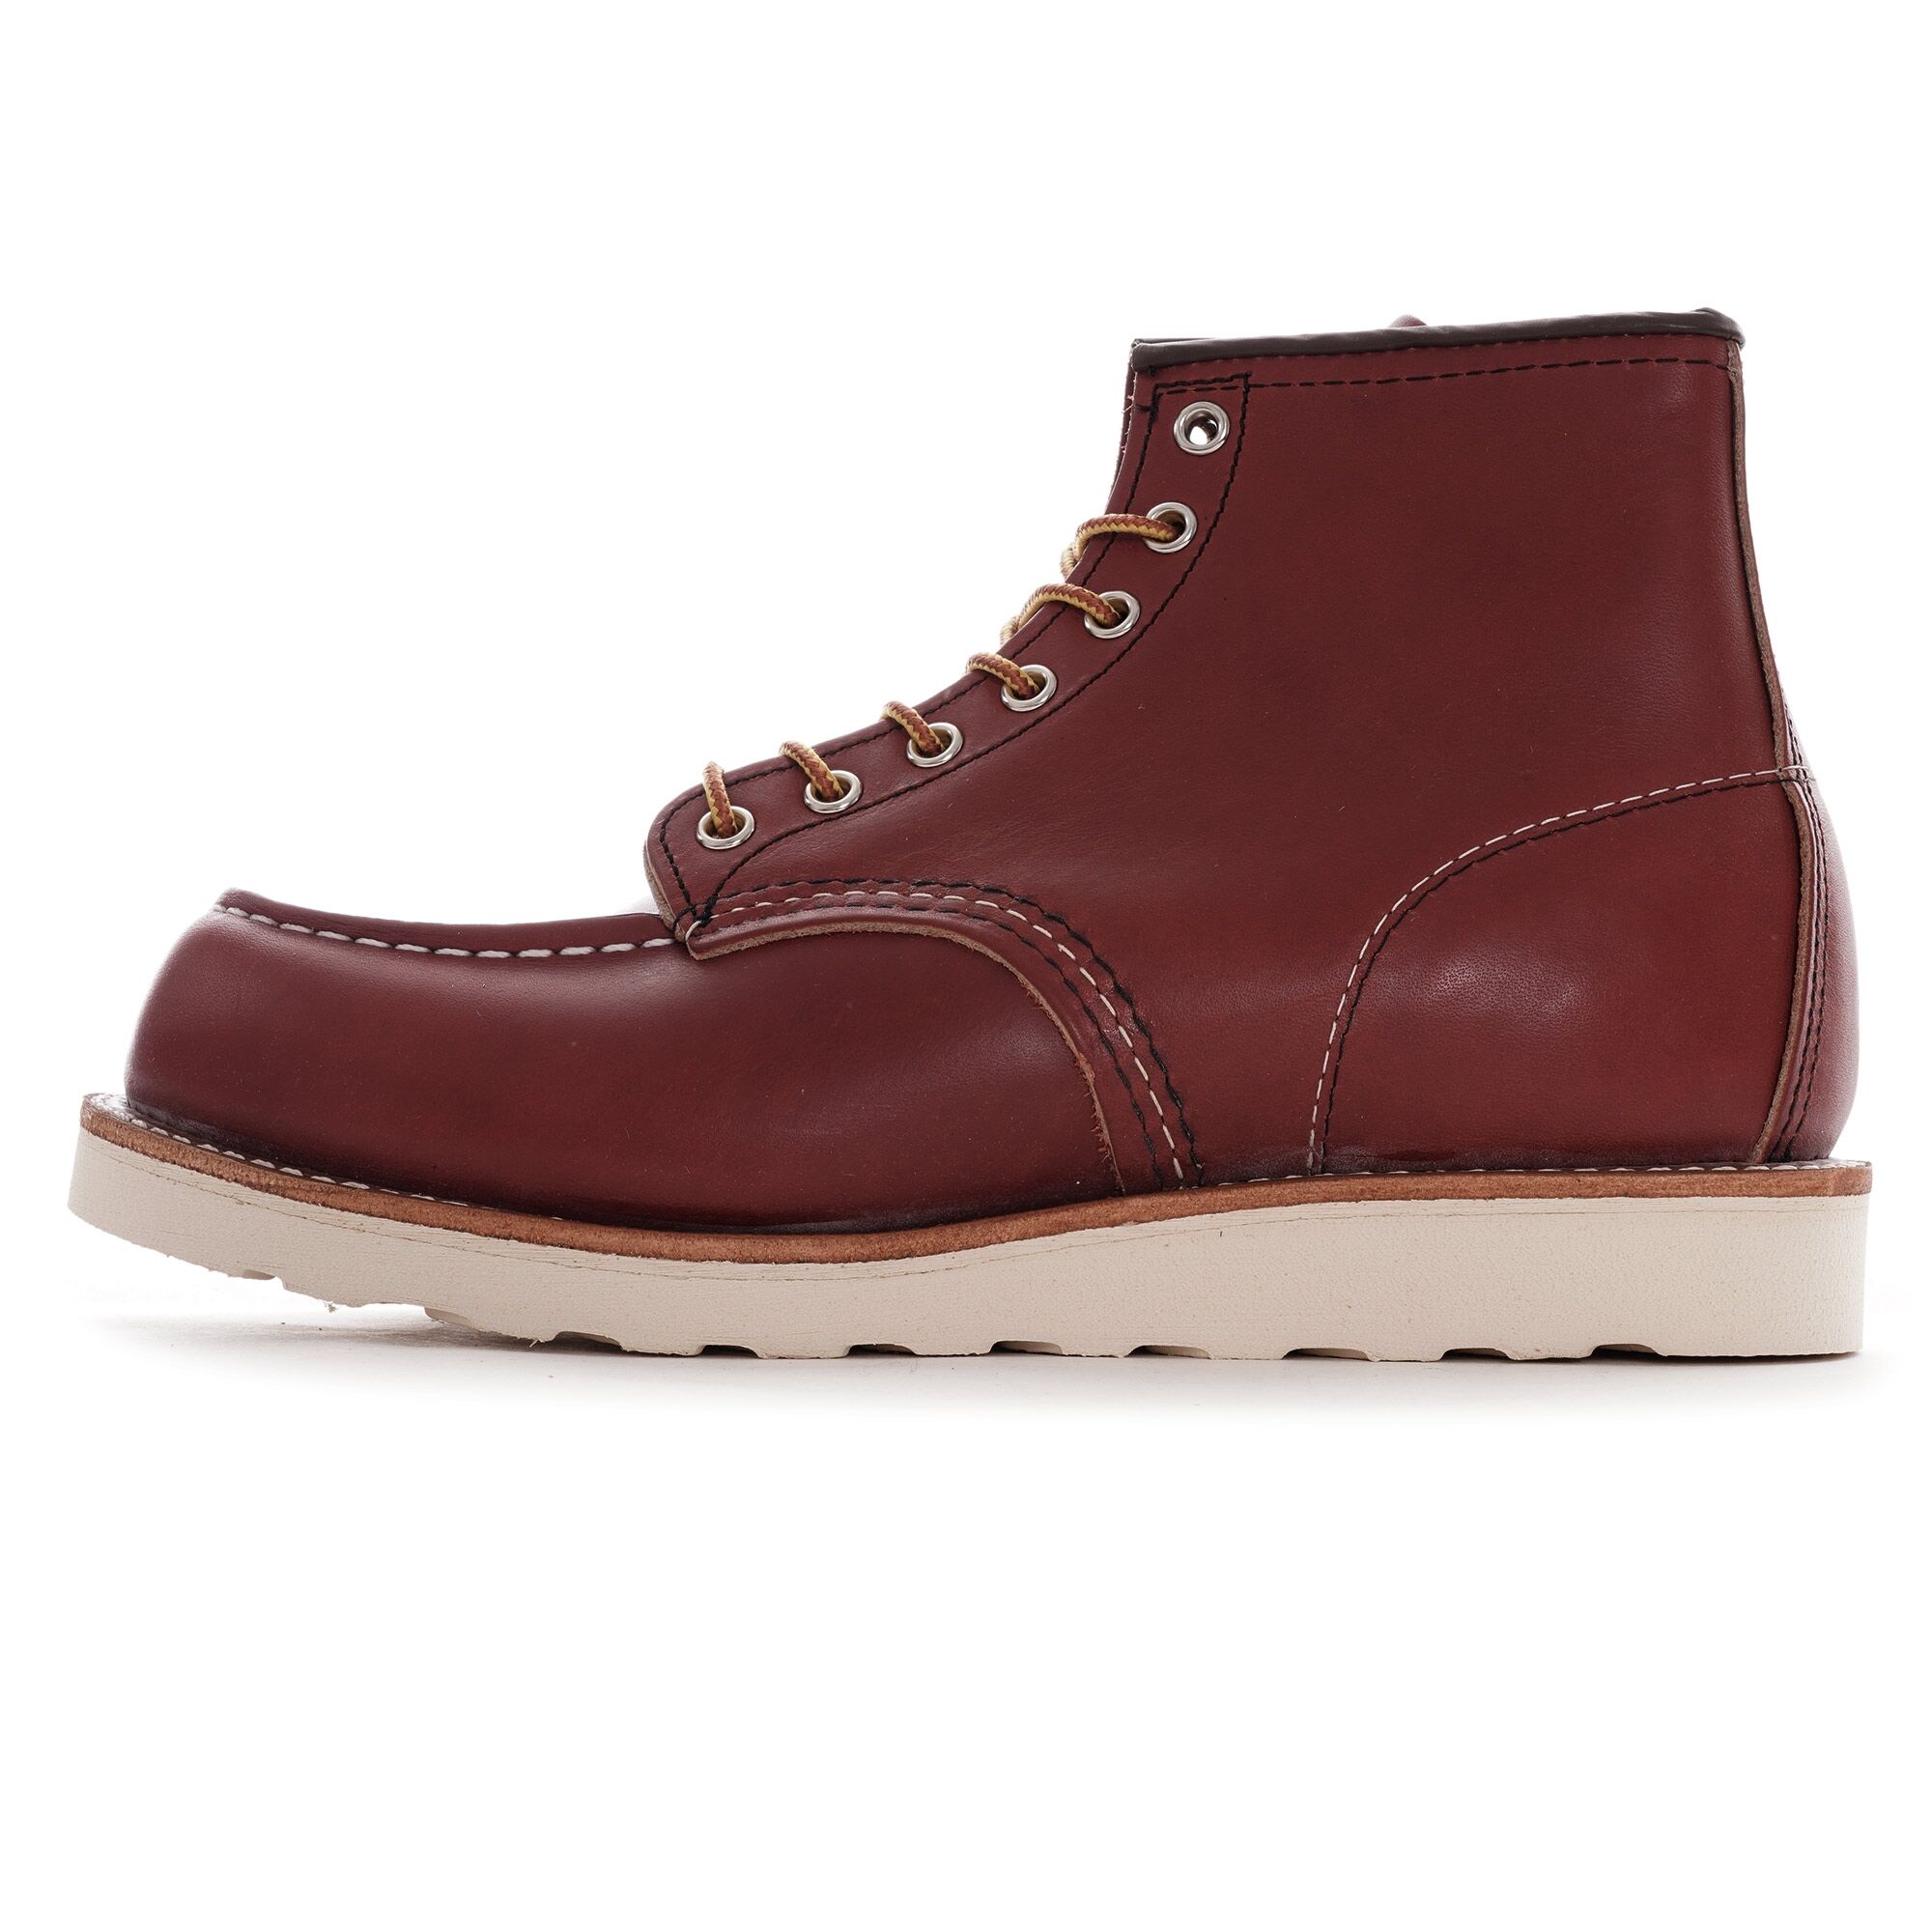 Red Wing Classic Moc Toe Boot - Briar - 8875D-BRN 6 BOOT Colour: Brown - Brown - male - Size: UK 8